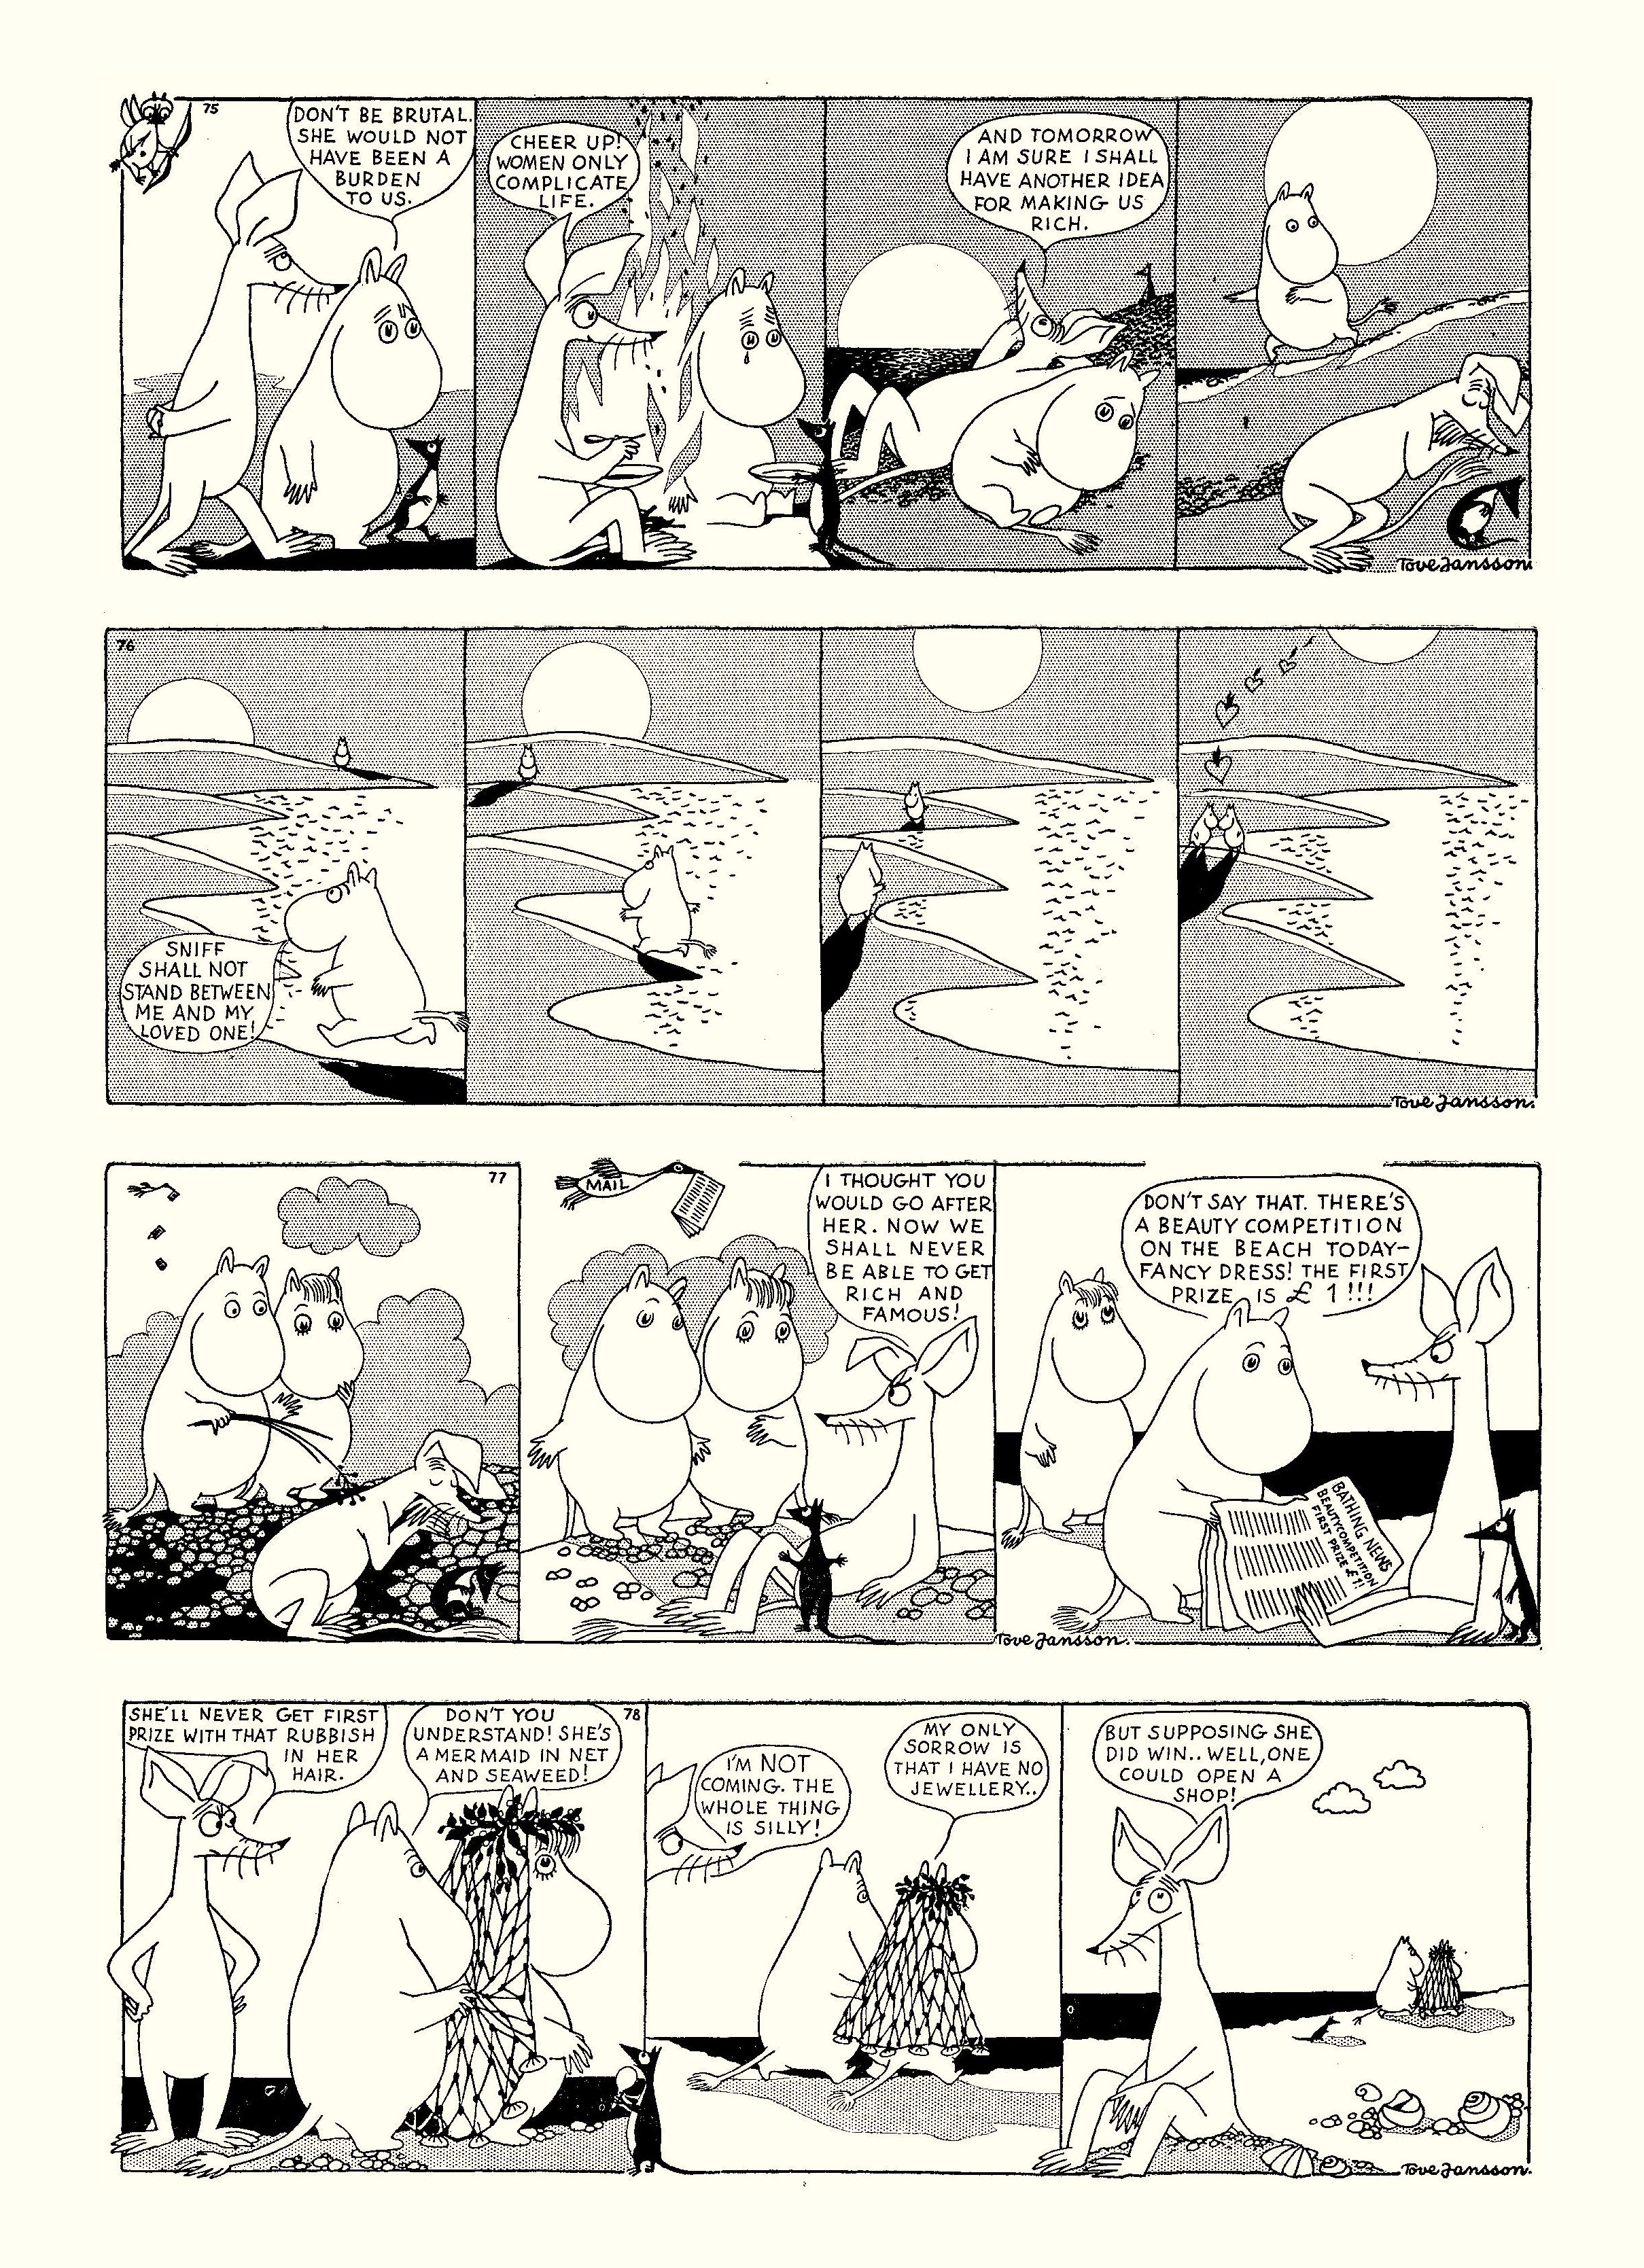 Read online Moomin: The Complete Tove Jansson Comic Strip comic -  Issue # TPB 1 - 25